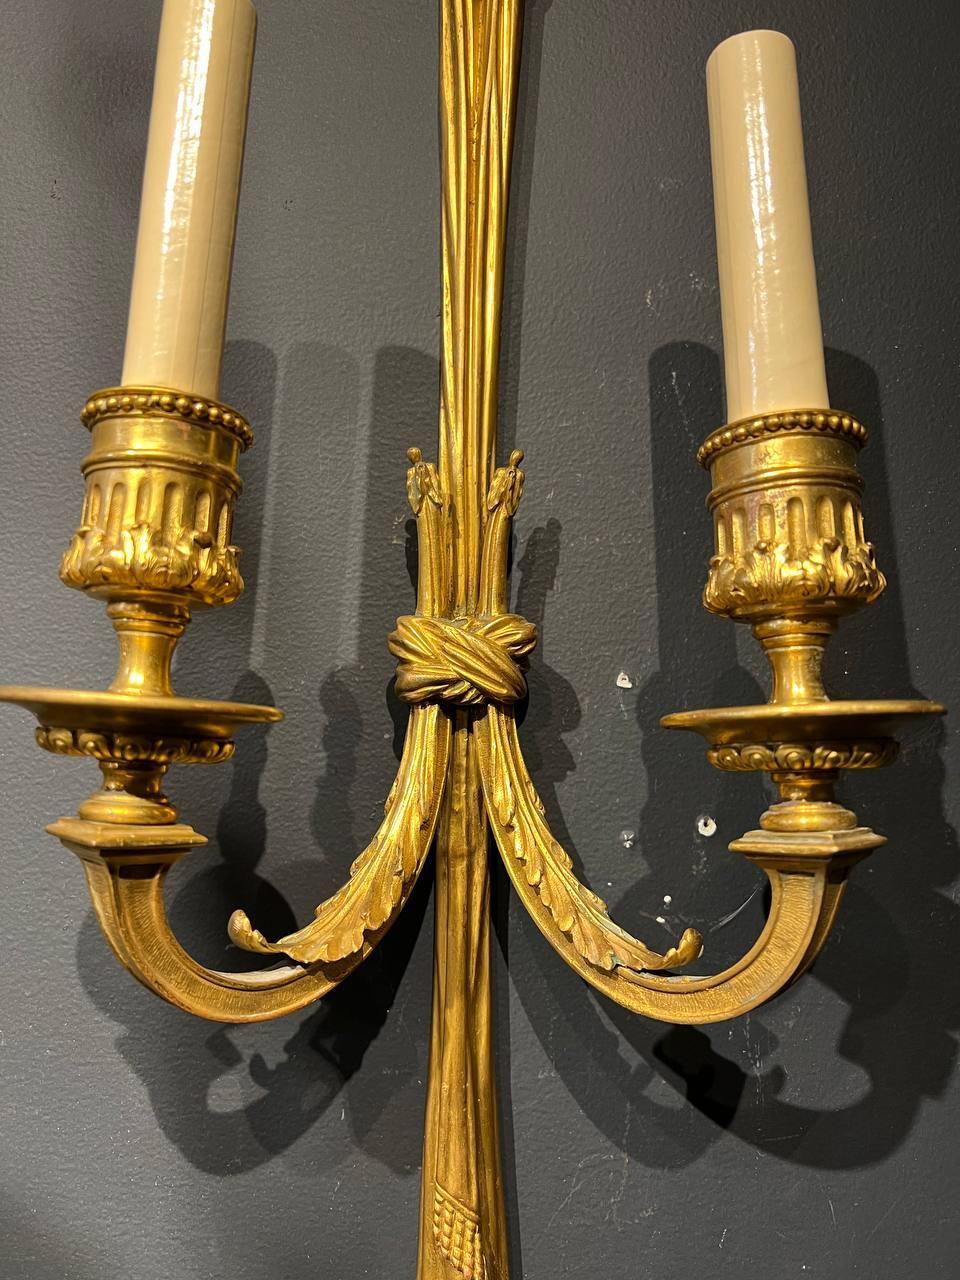 A pair of circa 1930’s Caldwell double light French style sconces original finish. Lamp shade is not included. In very good vintage condition, with original condition unaltered. 

Up to 120V (US Standard)
Hardwired

Dealer: G302YP 
